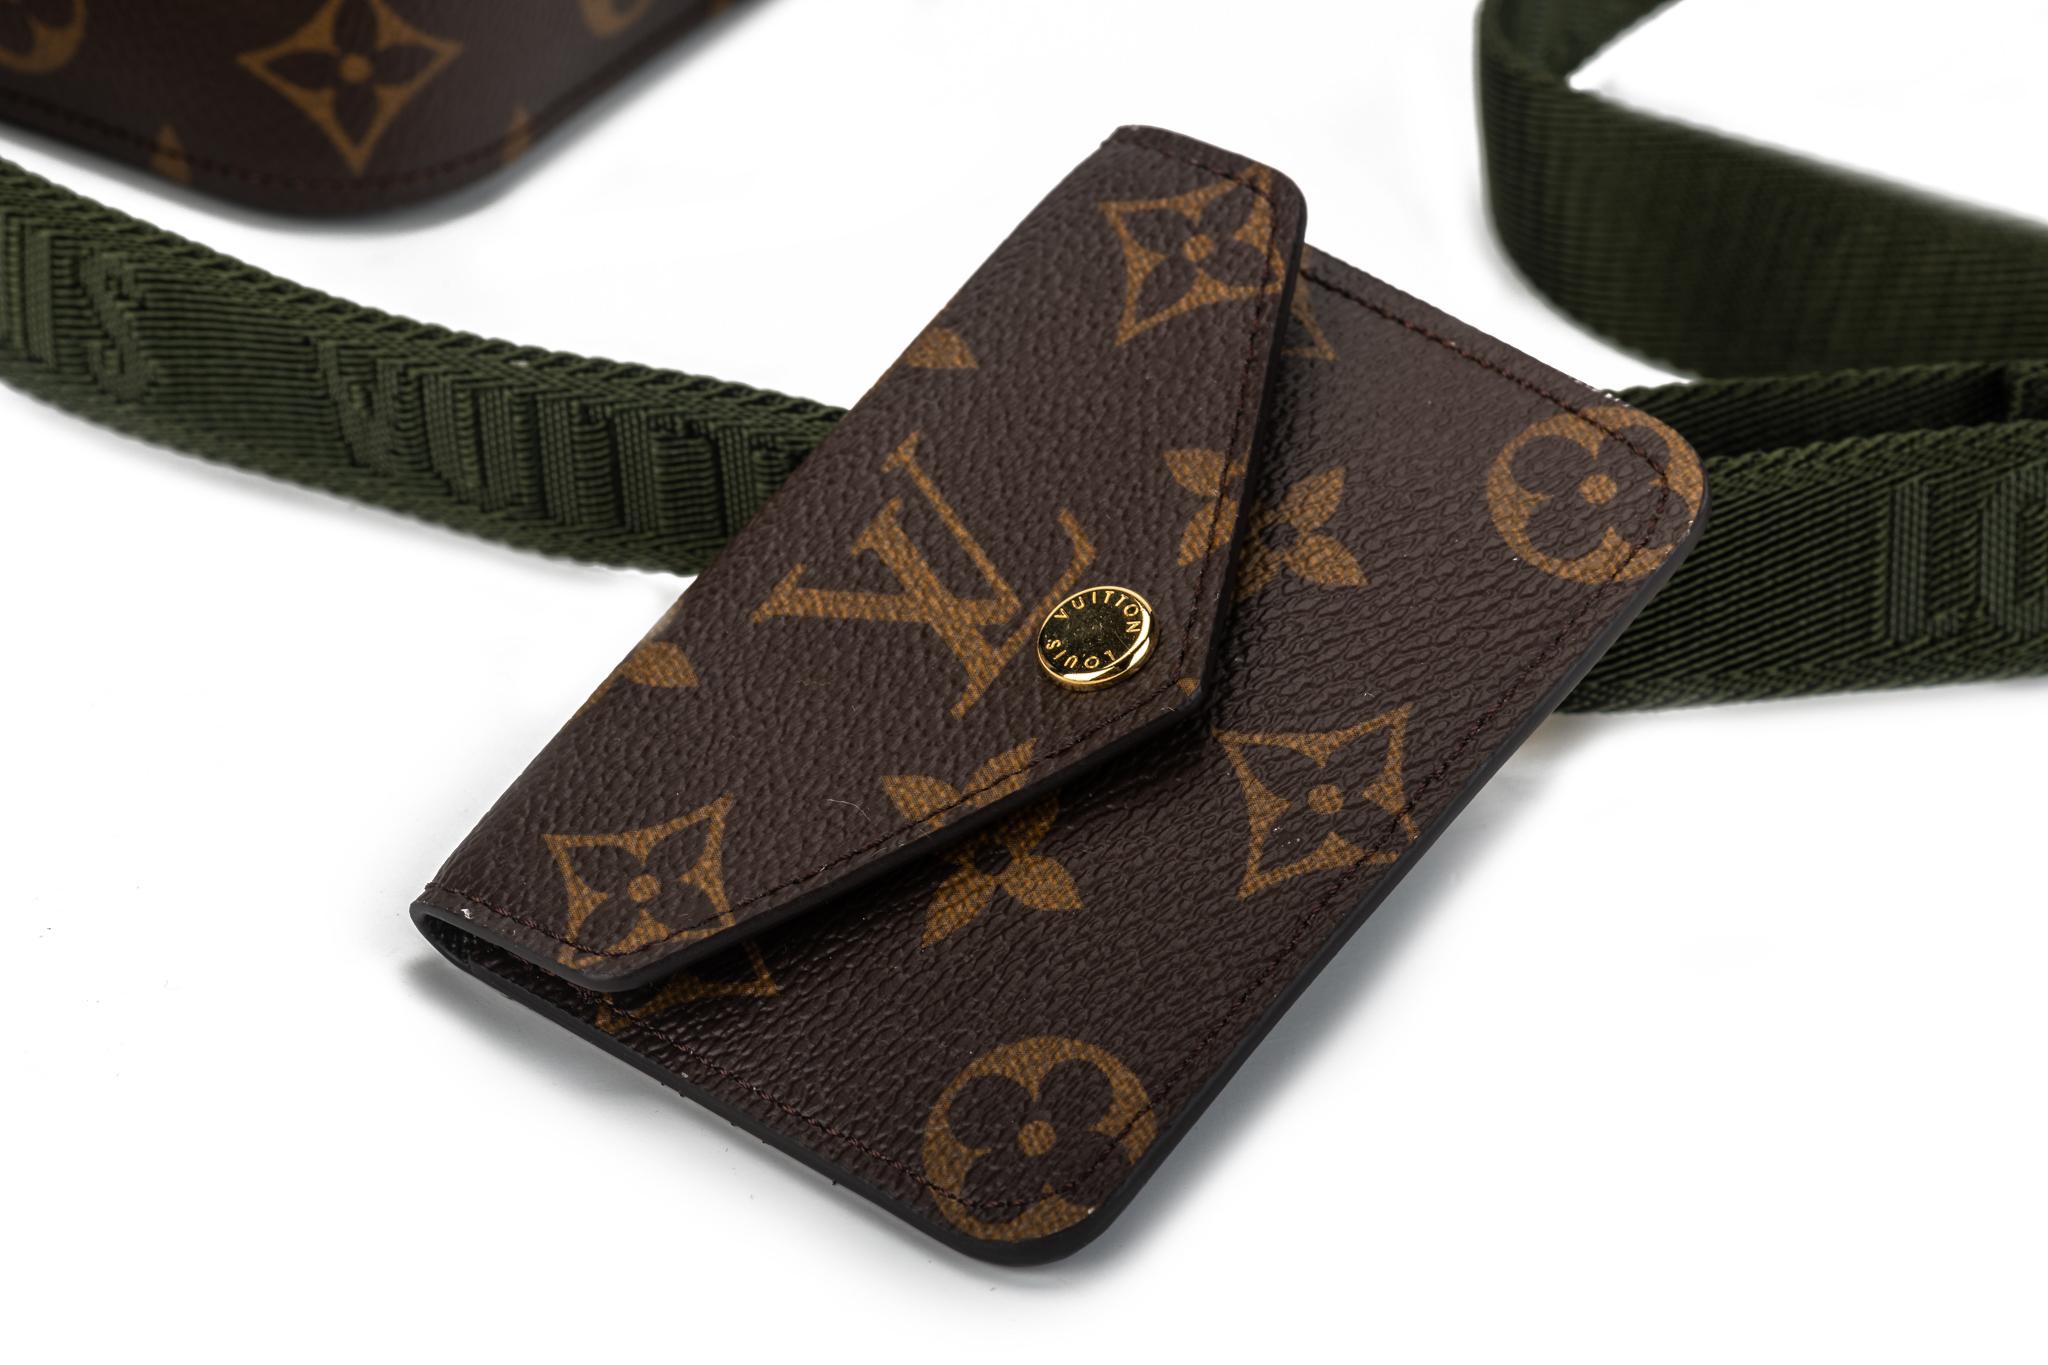 New Louis Vuitton Monogram Mini Felicie Multi Bag In New Condition For Sale In West Hollywood, CA